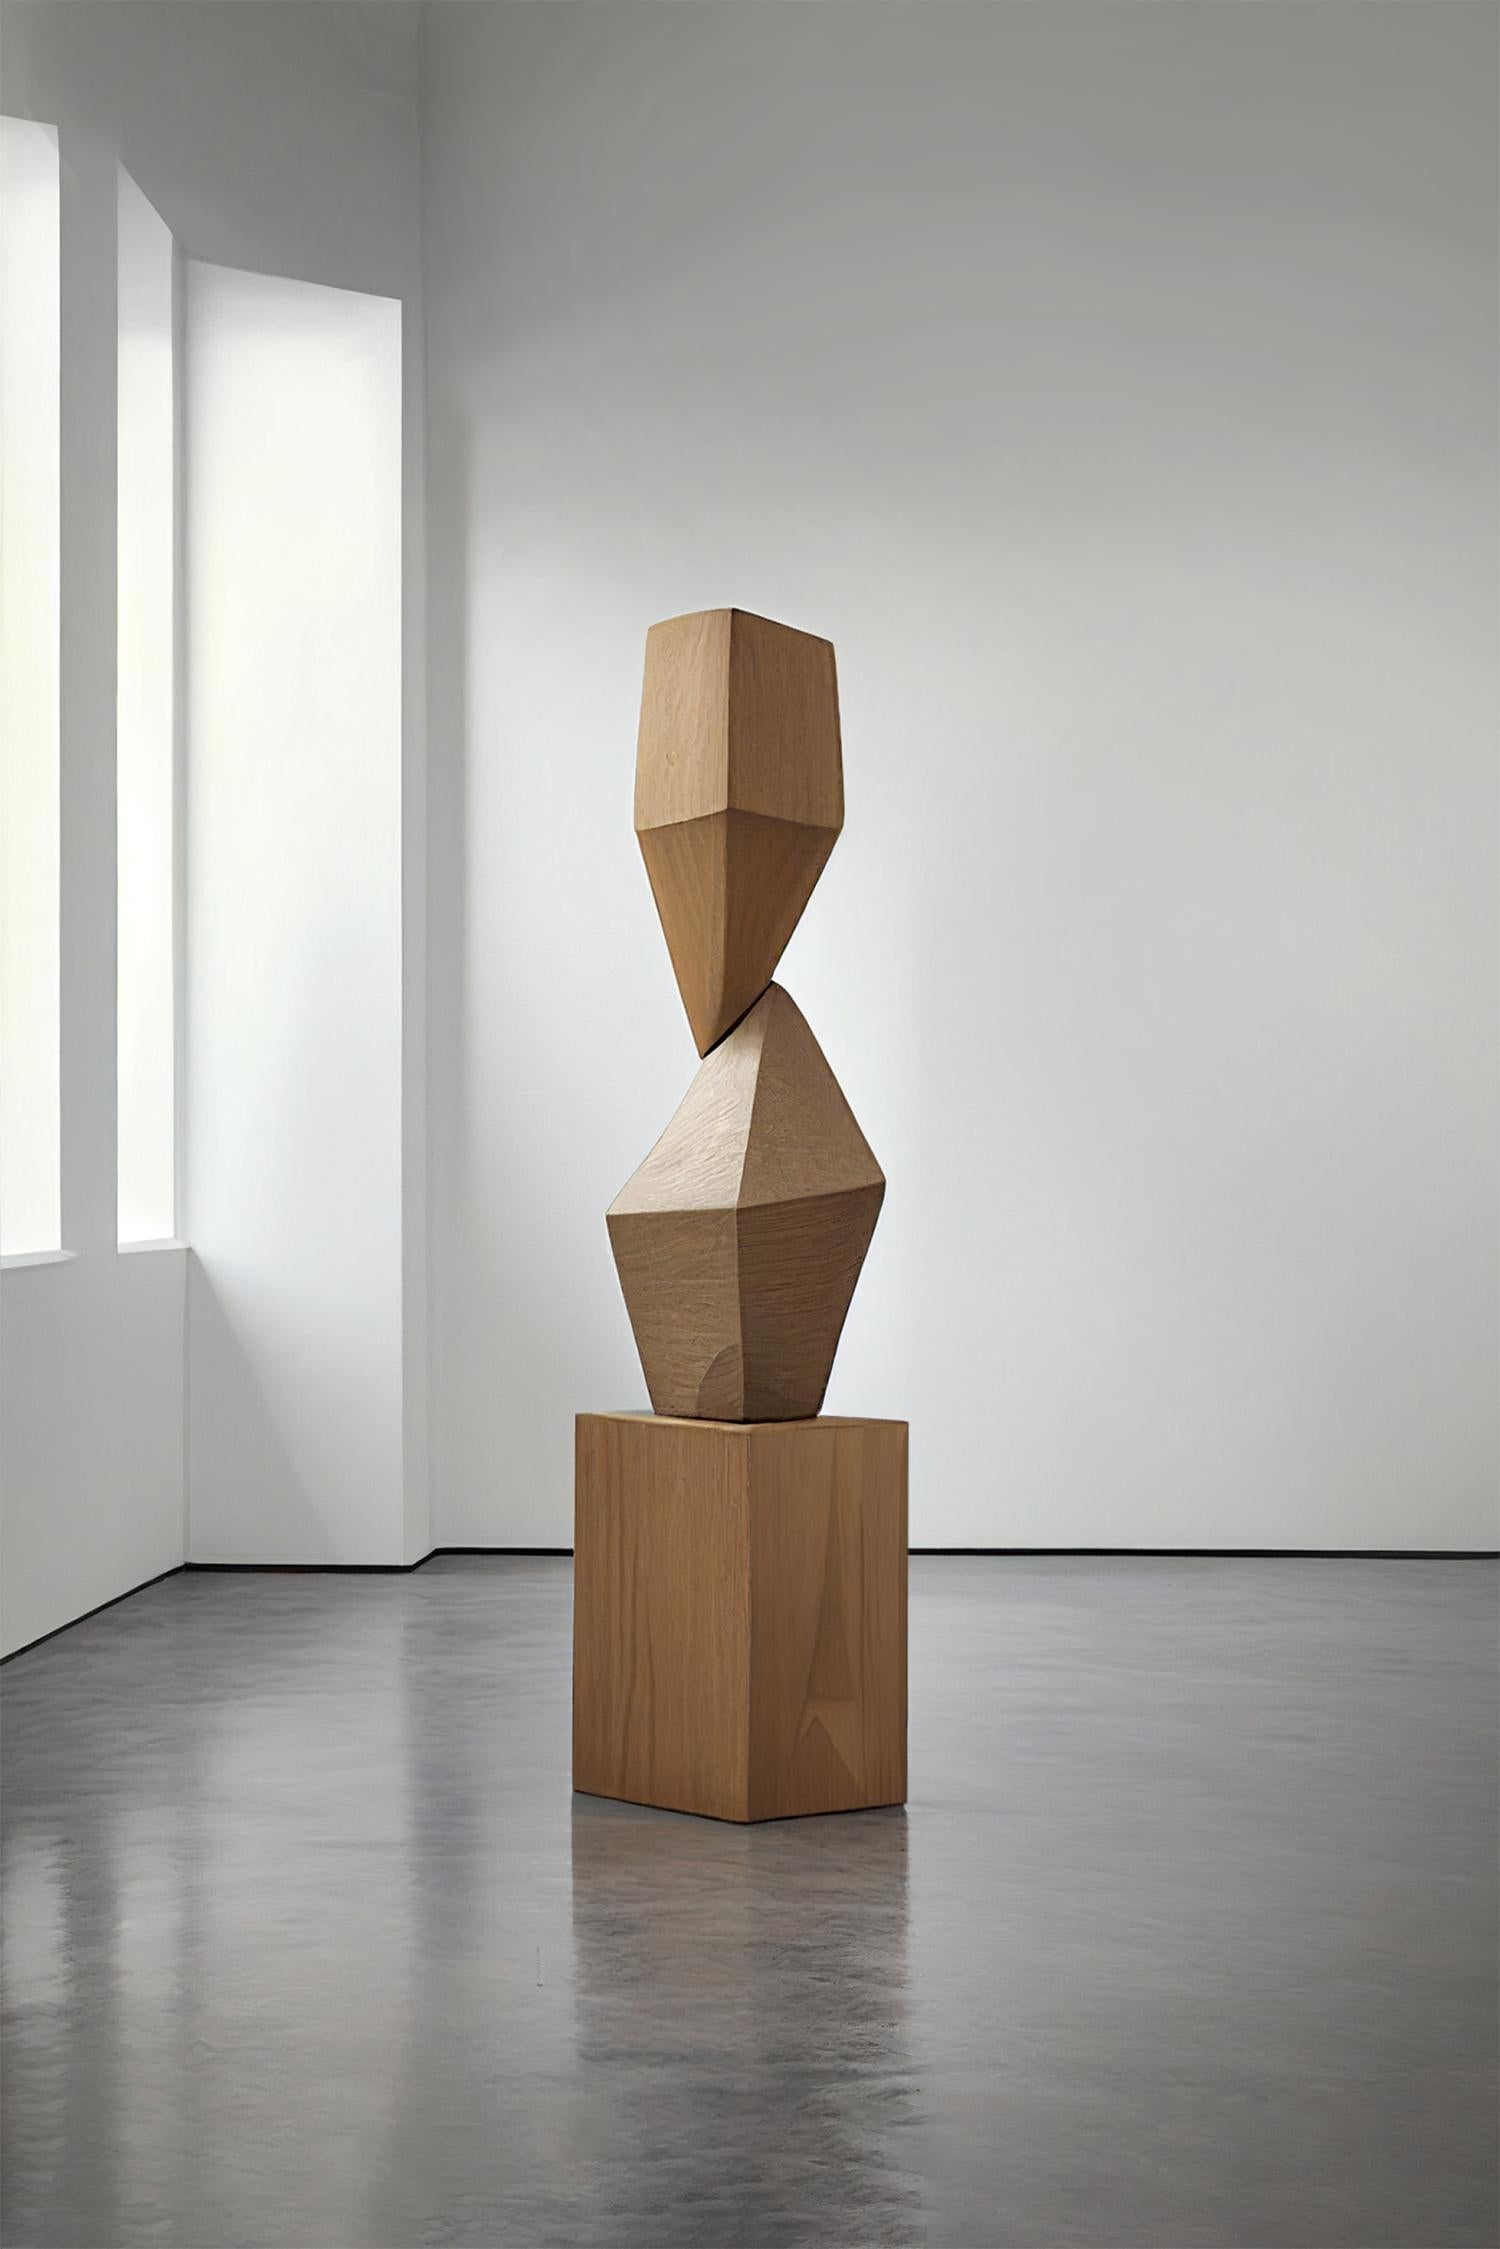 This monolithic sculpture, designed by the talented artist Joel Escalona, is a towering example of beauty in craftsmanship. Hand and digital machine made; the standing sculpture stands tall as a monument to the skill of the artist. The wood carved